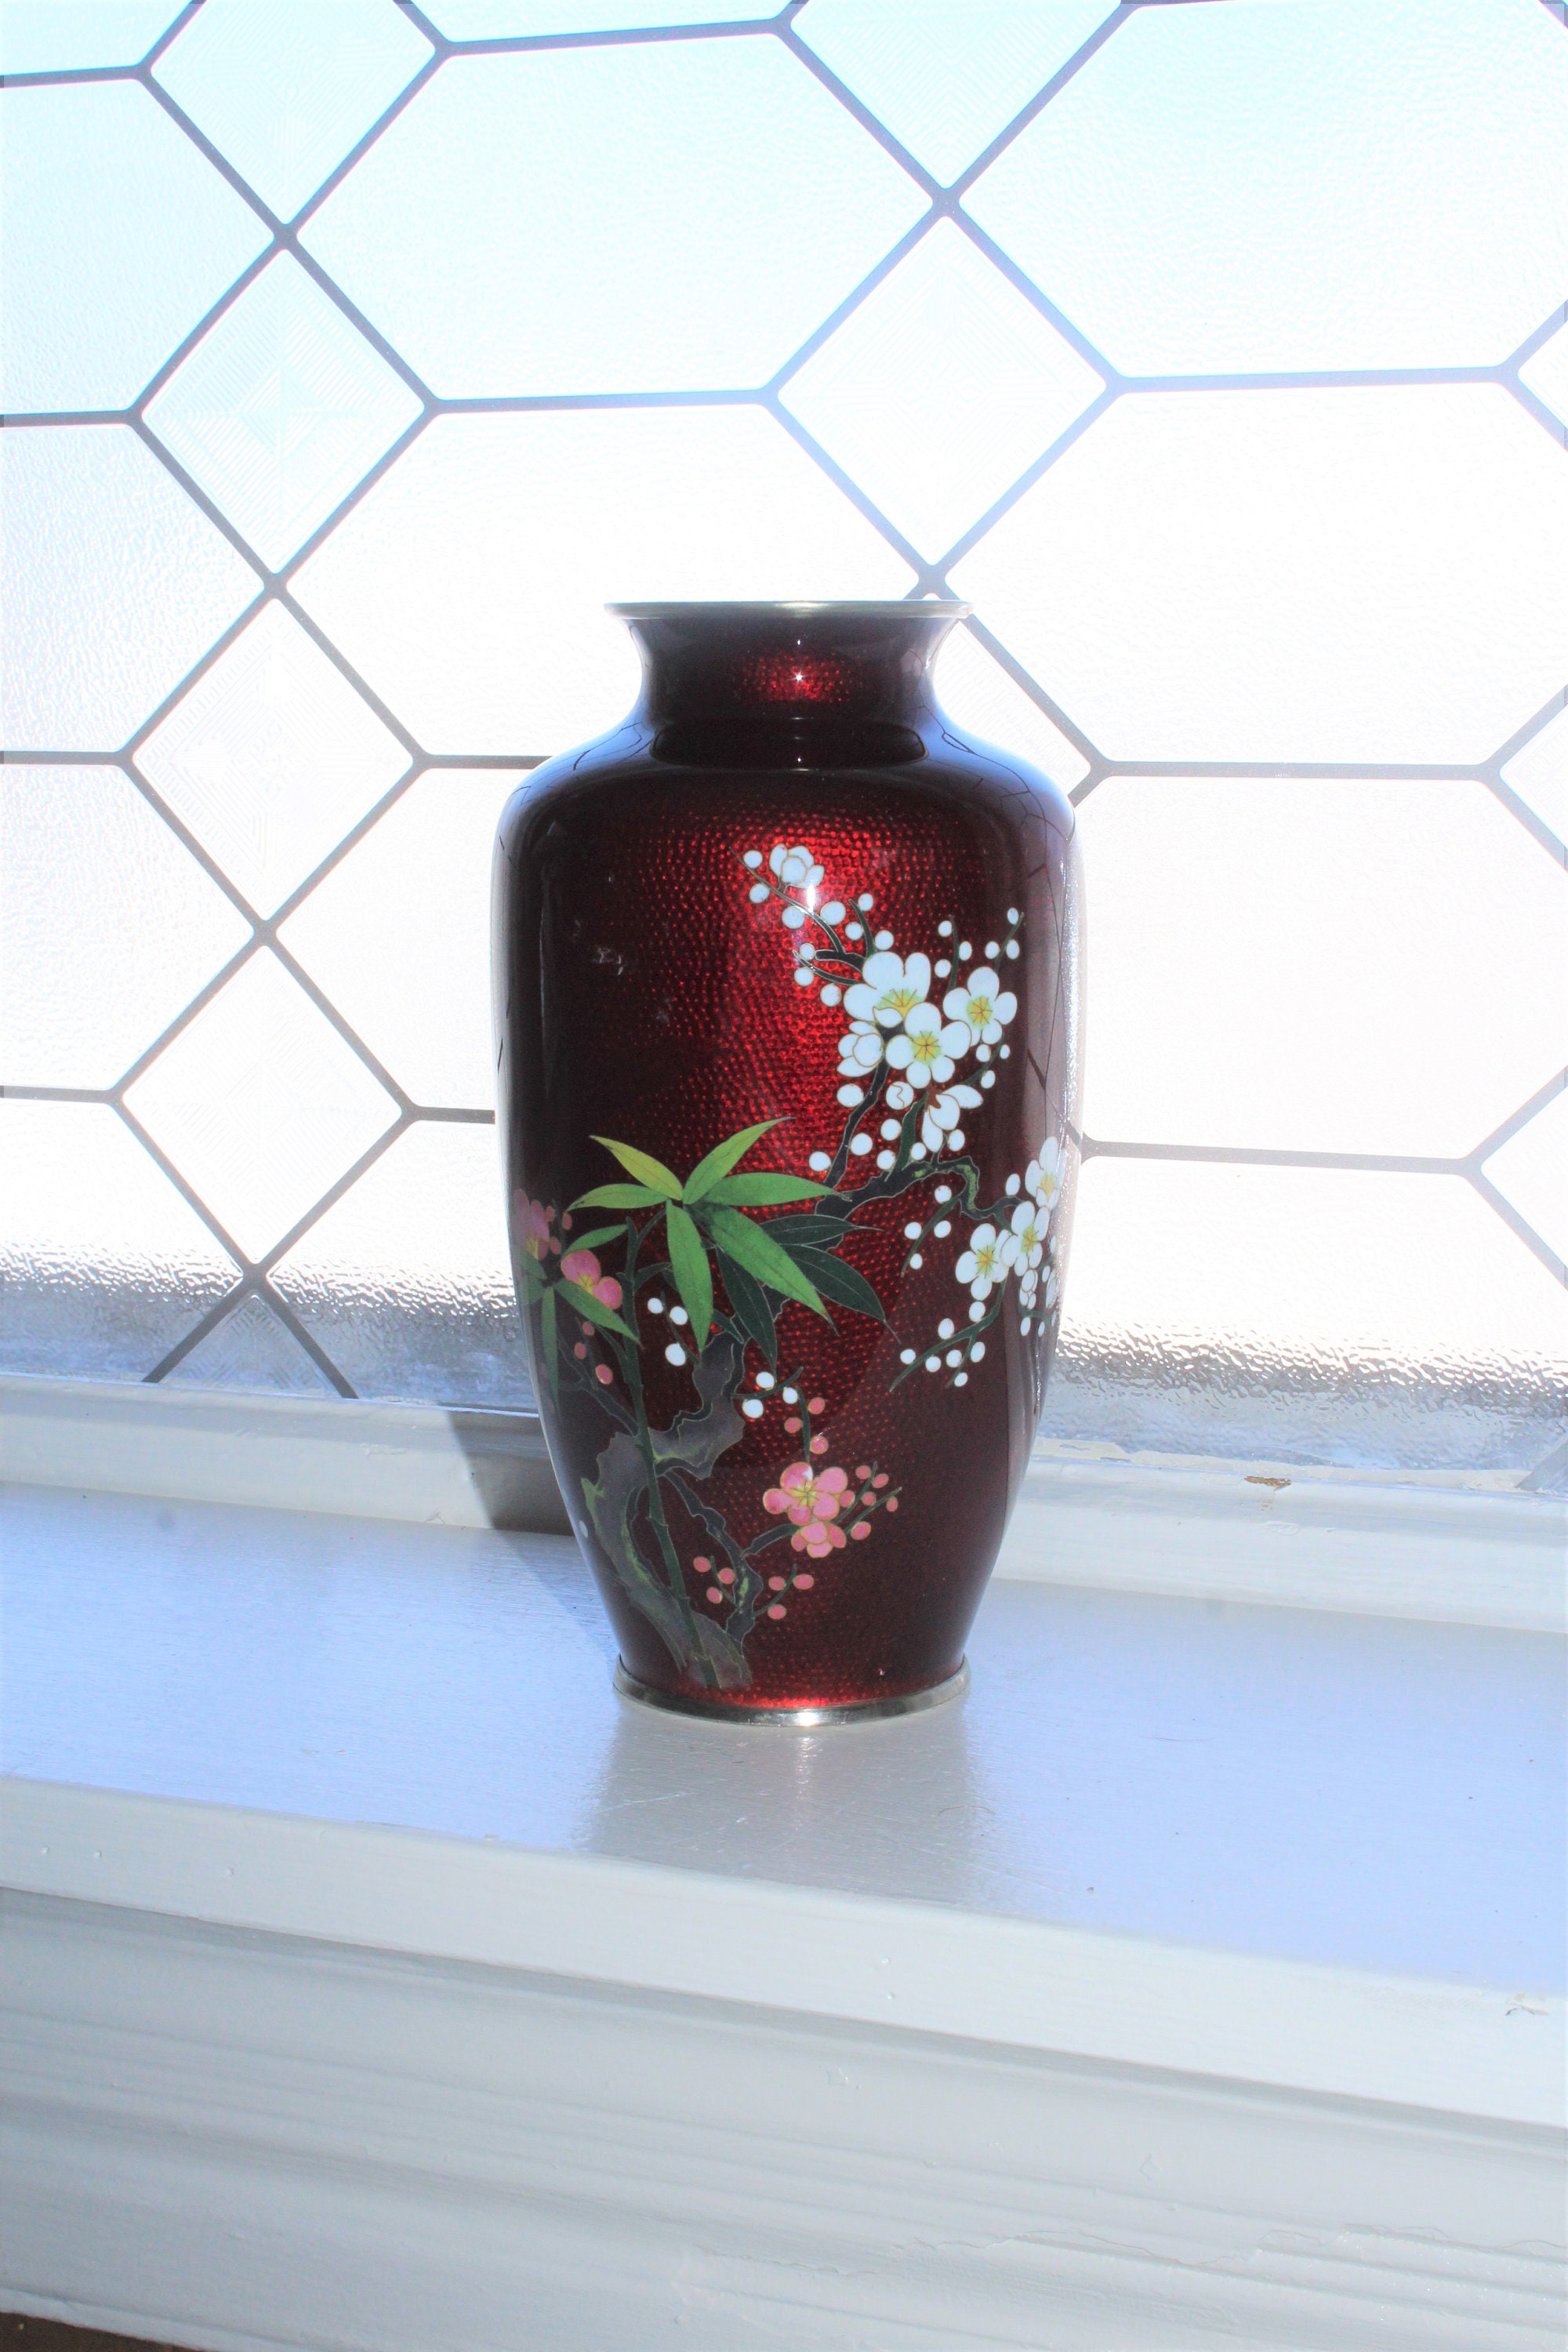 Vintage Japanese flower vase with punica granatum pattern in red